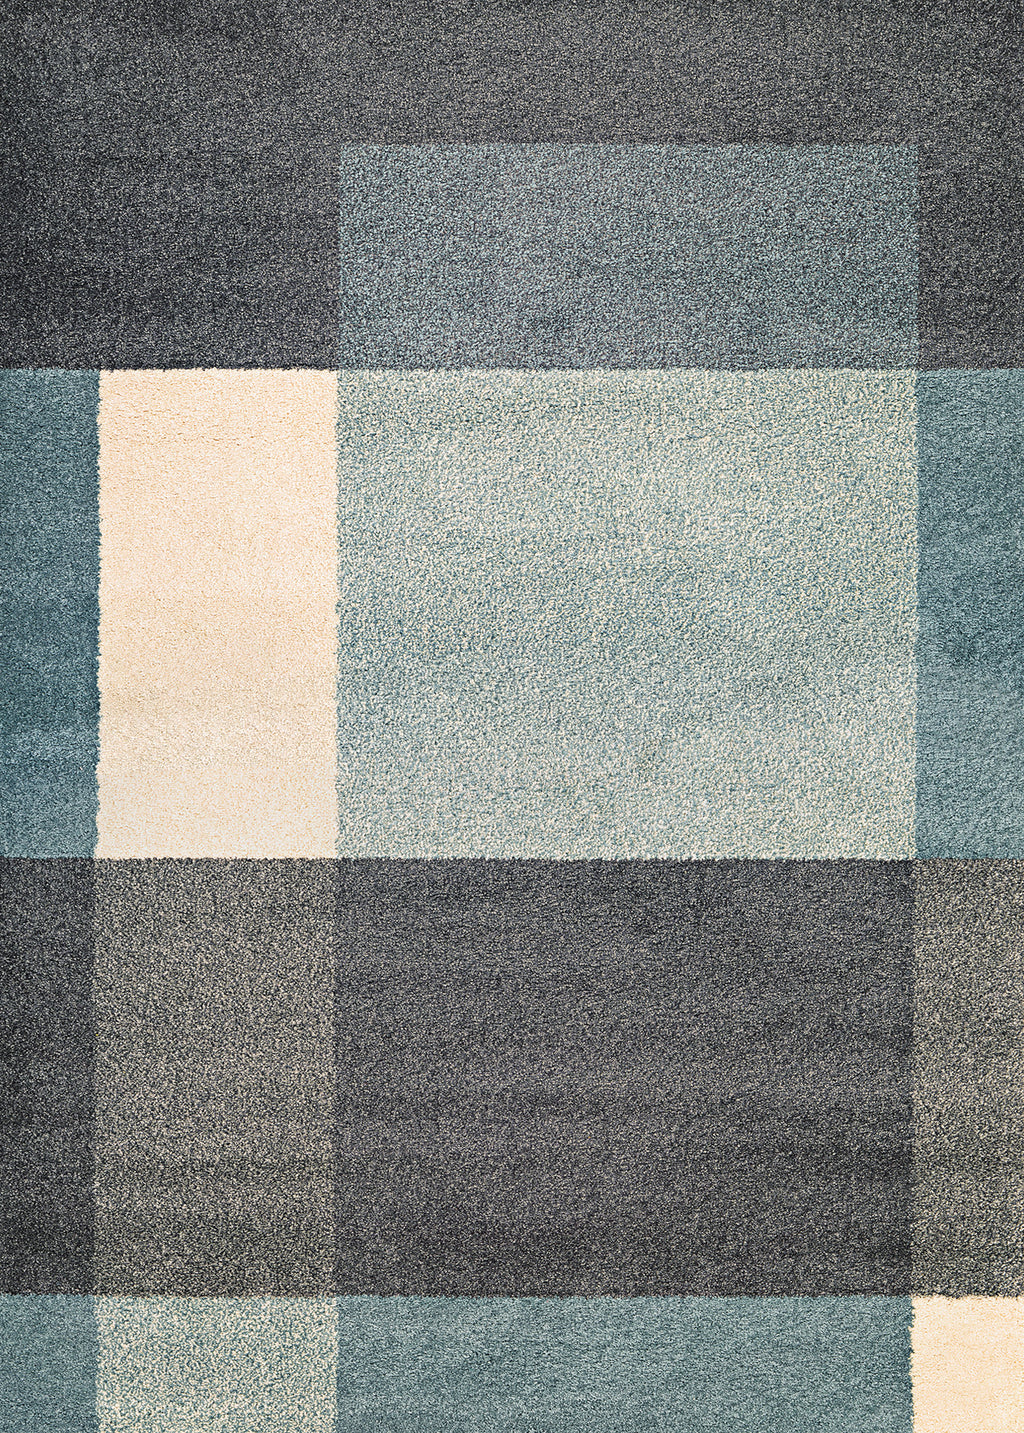 Couristan Moonwalk Fortress Charcoal/Teal/Ivory Area Rug